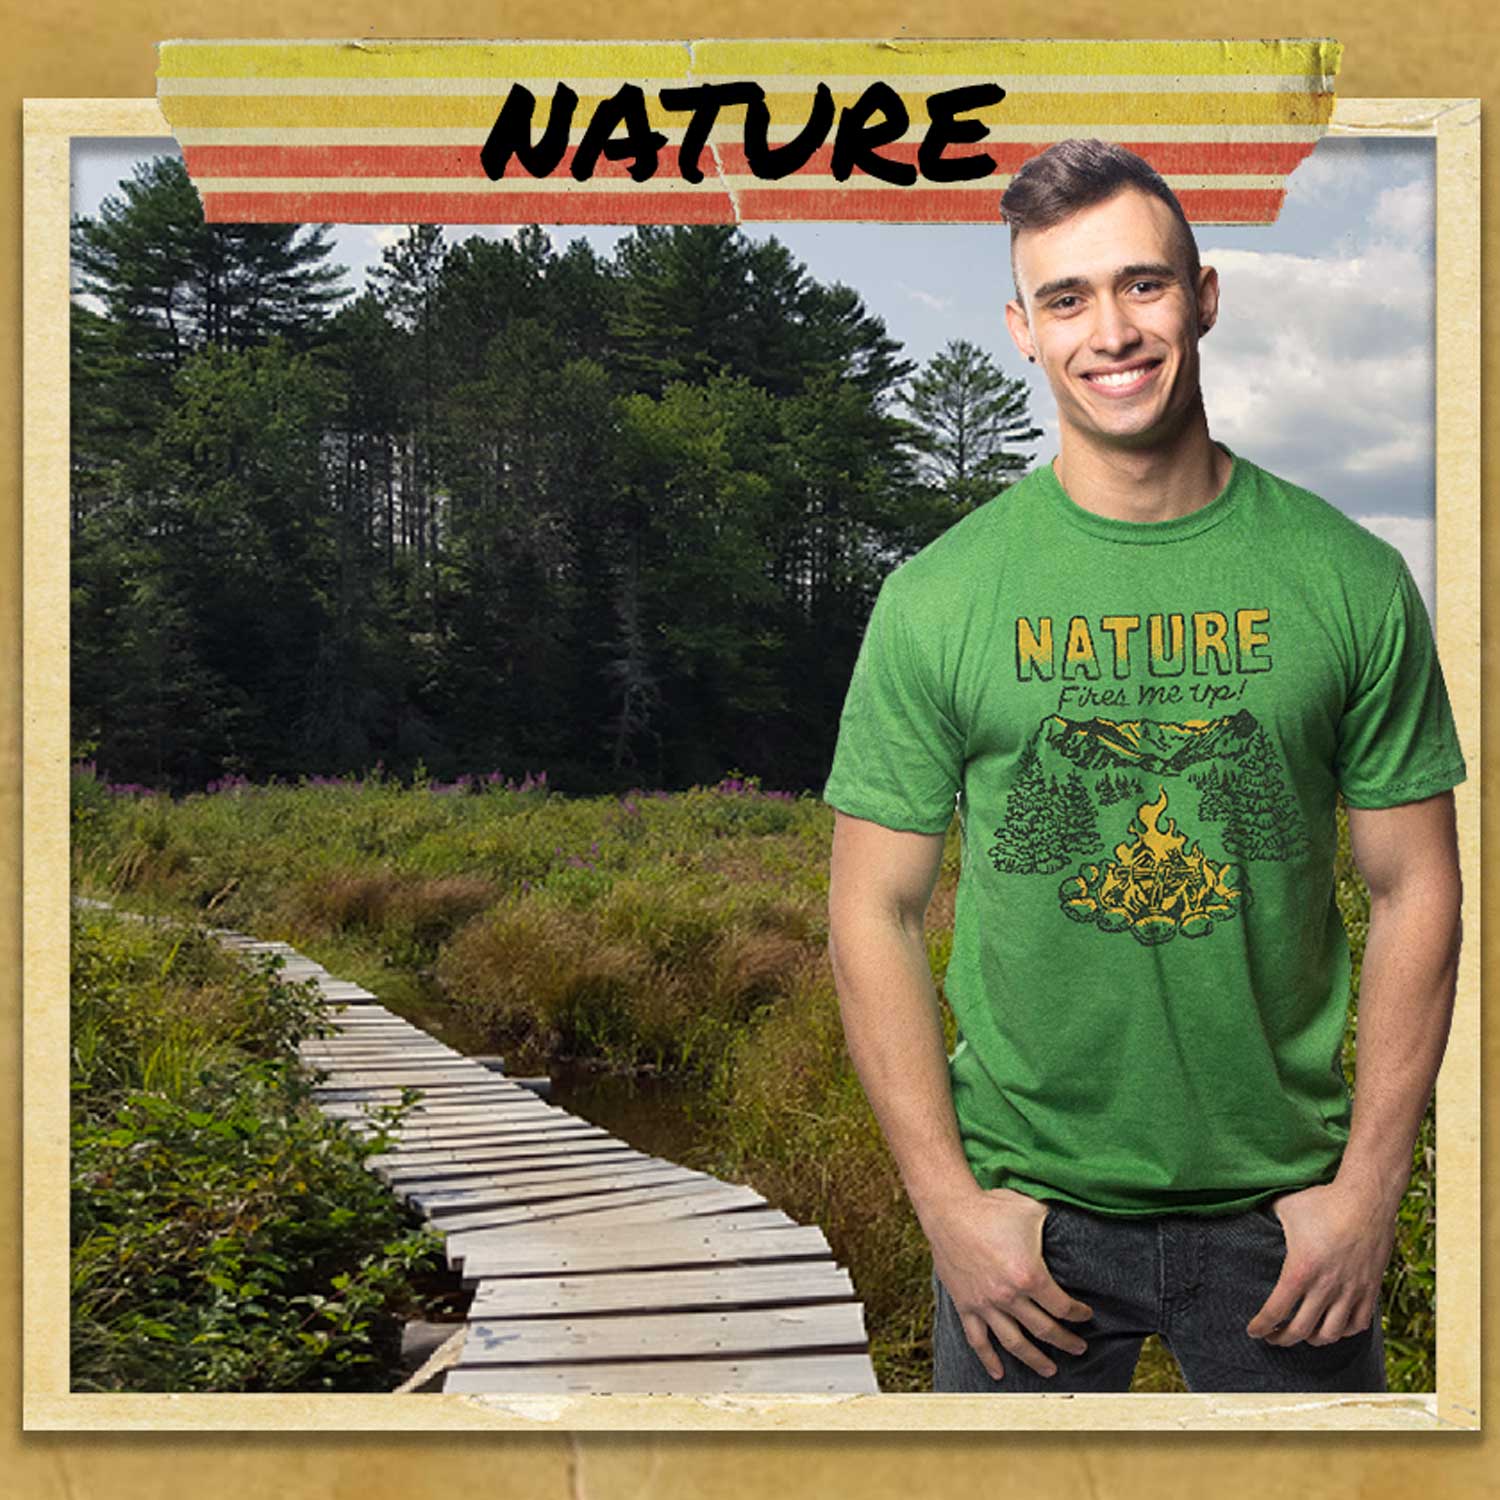 Retro Nature Graphic Tees | Cool Vintage Outdoorsy T-Shirts | Solid Threads